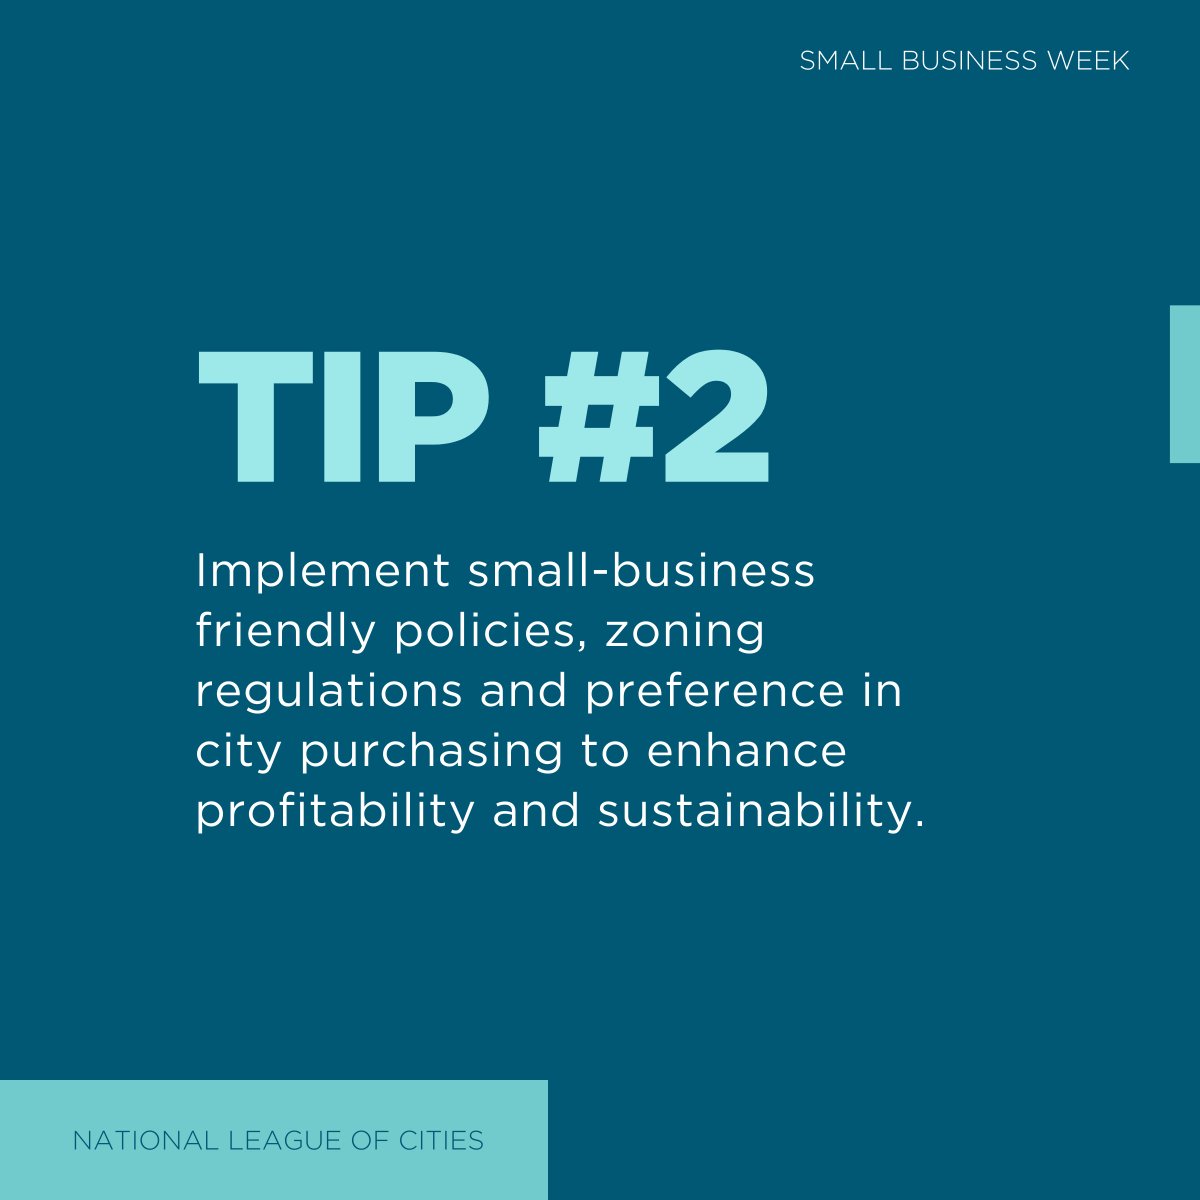 It’s #NationalSmallBusinessWeek! Swipe through for tips on how local leaders can champion and support small businesses in our communities. Want more insights? Sign up for NLC's City Inclusive Entrepreneurship Speaker Series: nlc.org/events/city-in…